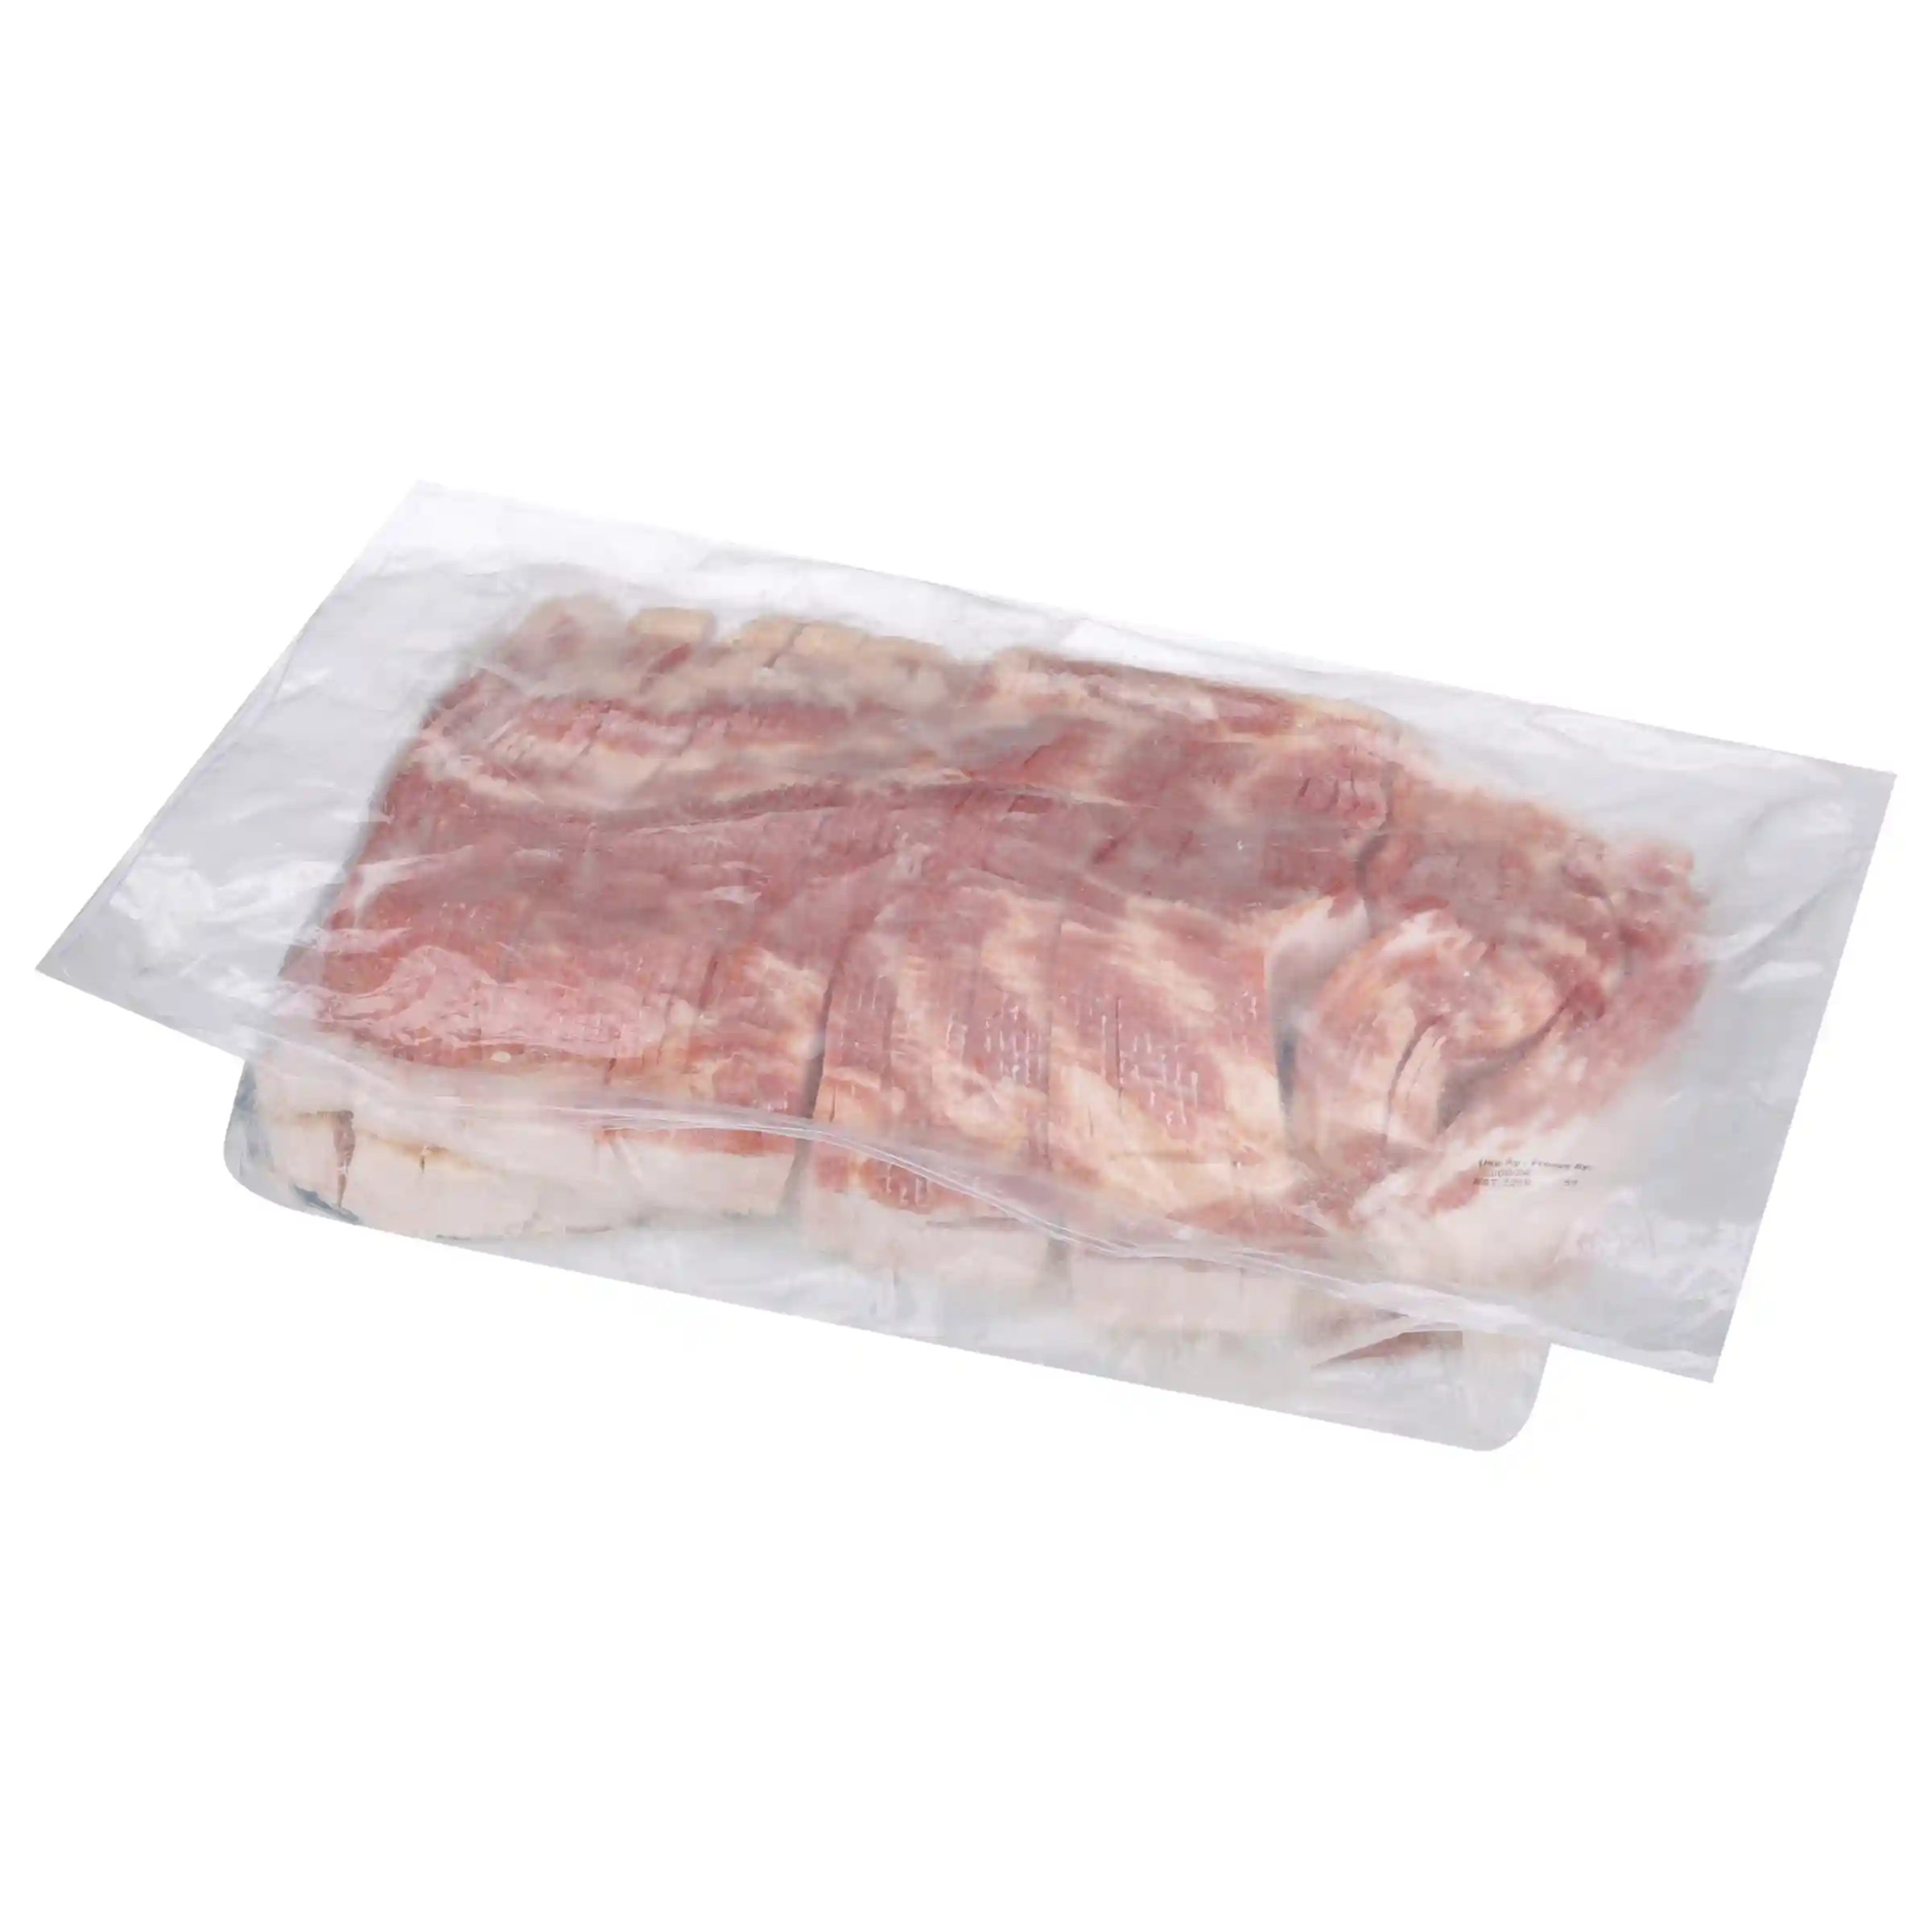 Wright® Brand Naturally Applewood Smoked Thick Sliced Bacon, Bulk, 10-14 Slices per Pound, Gas Flushed_image_21